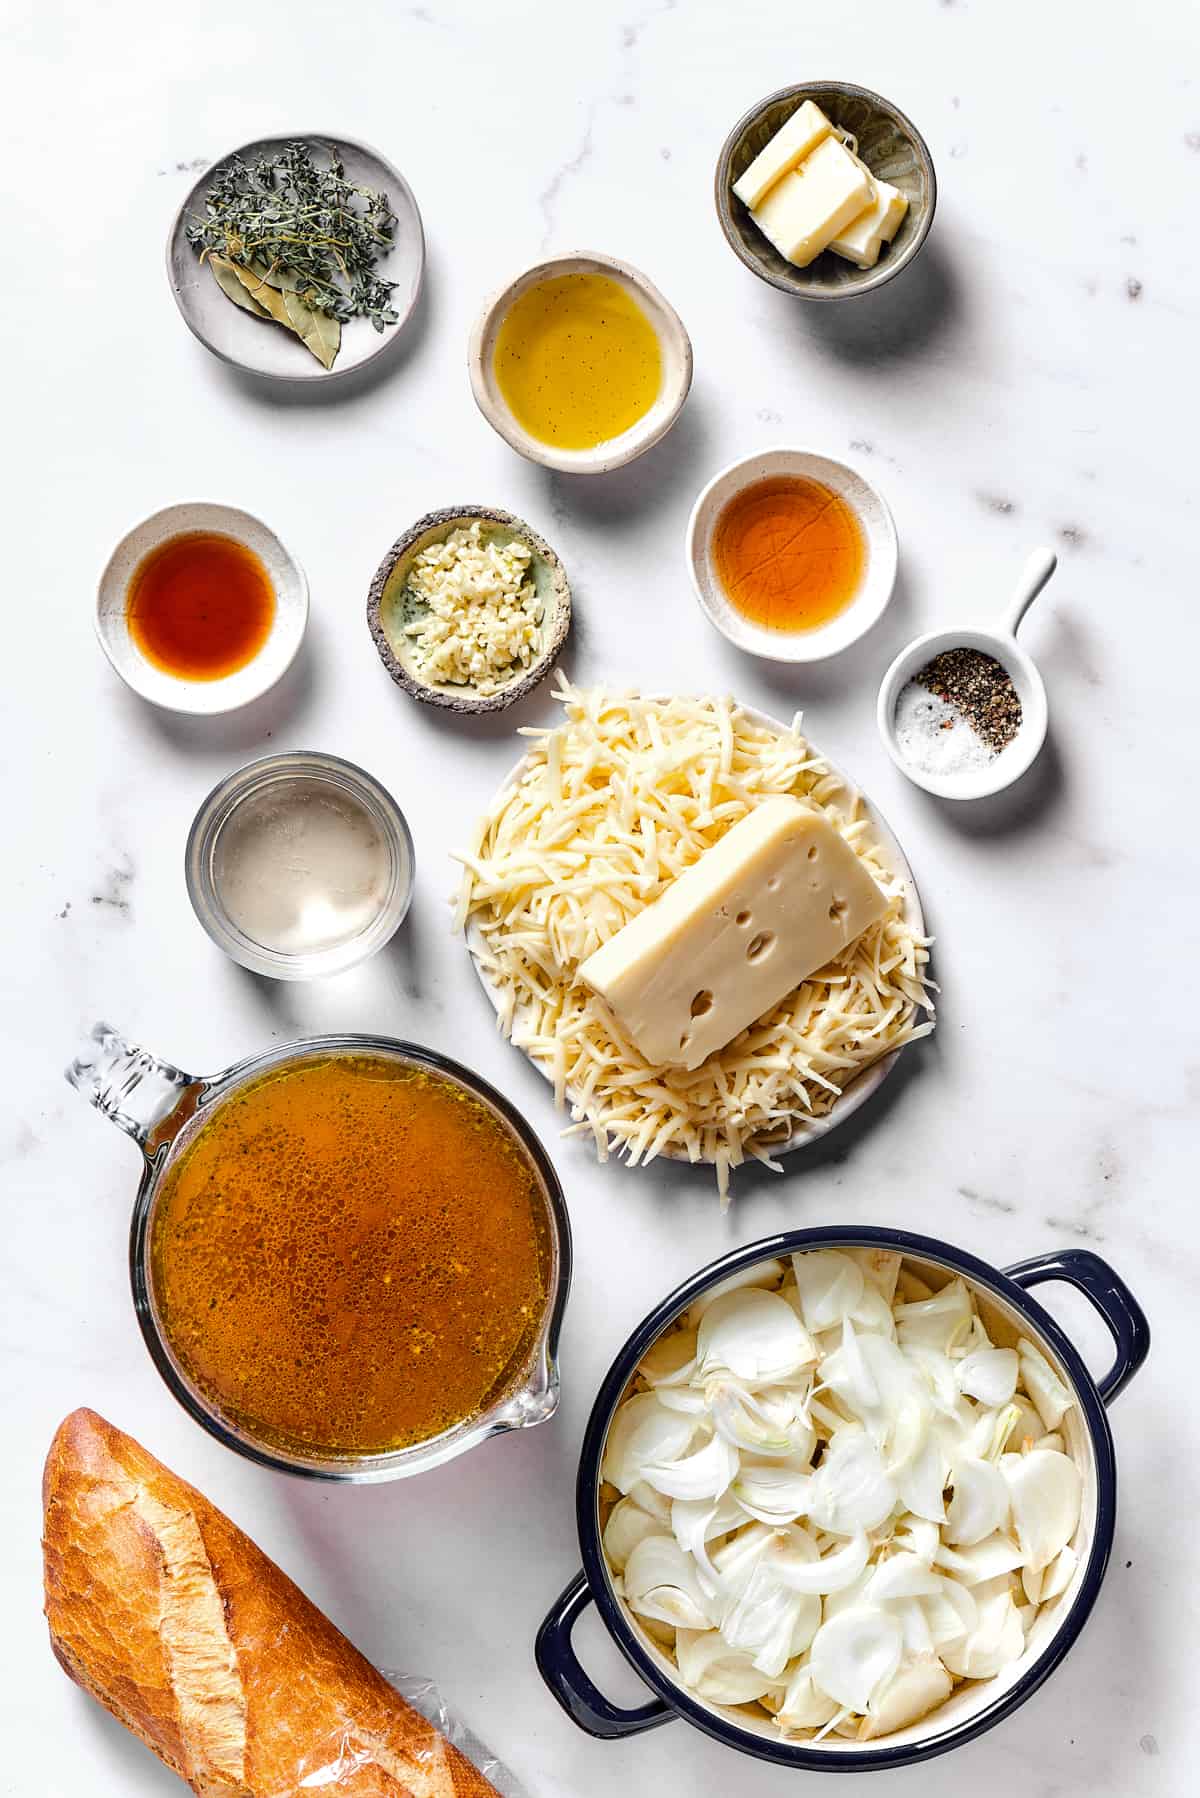 Ingredients for French onion soup arranged on a work surface.